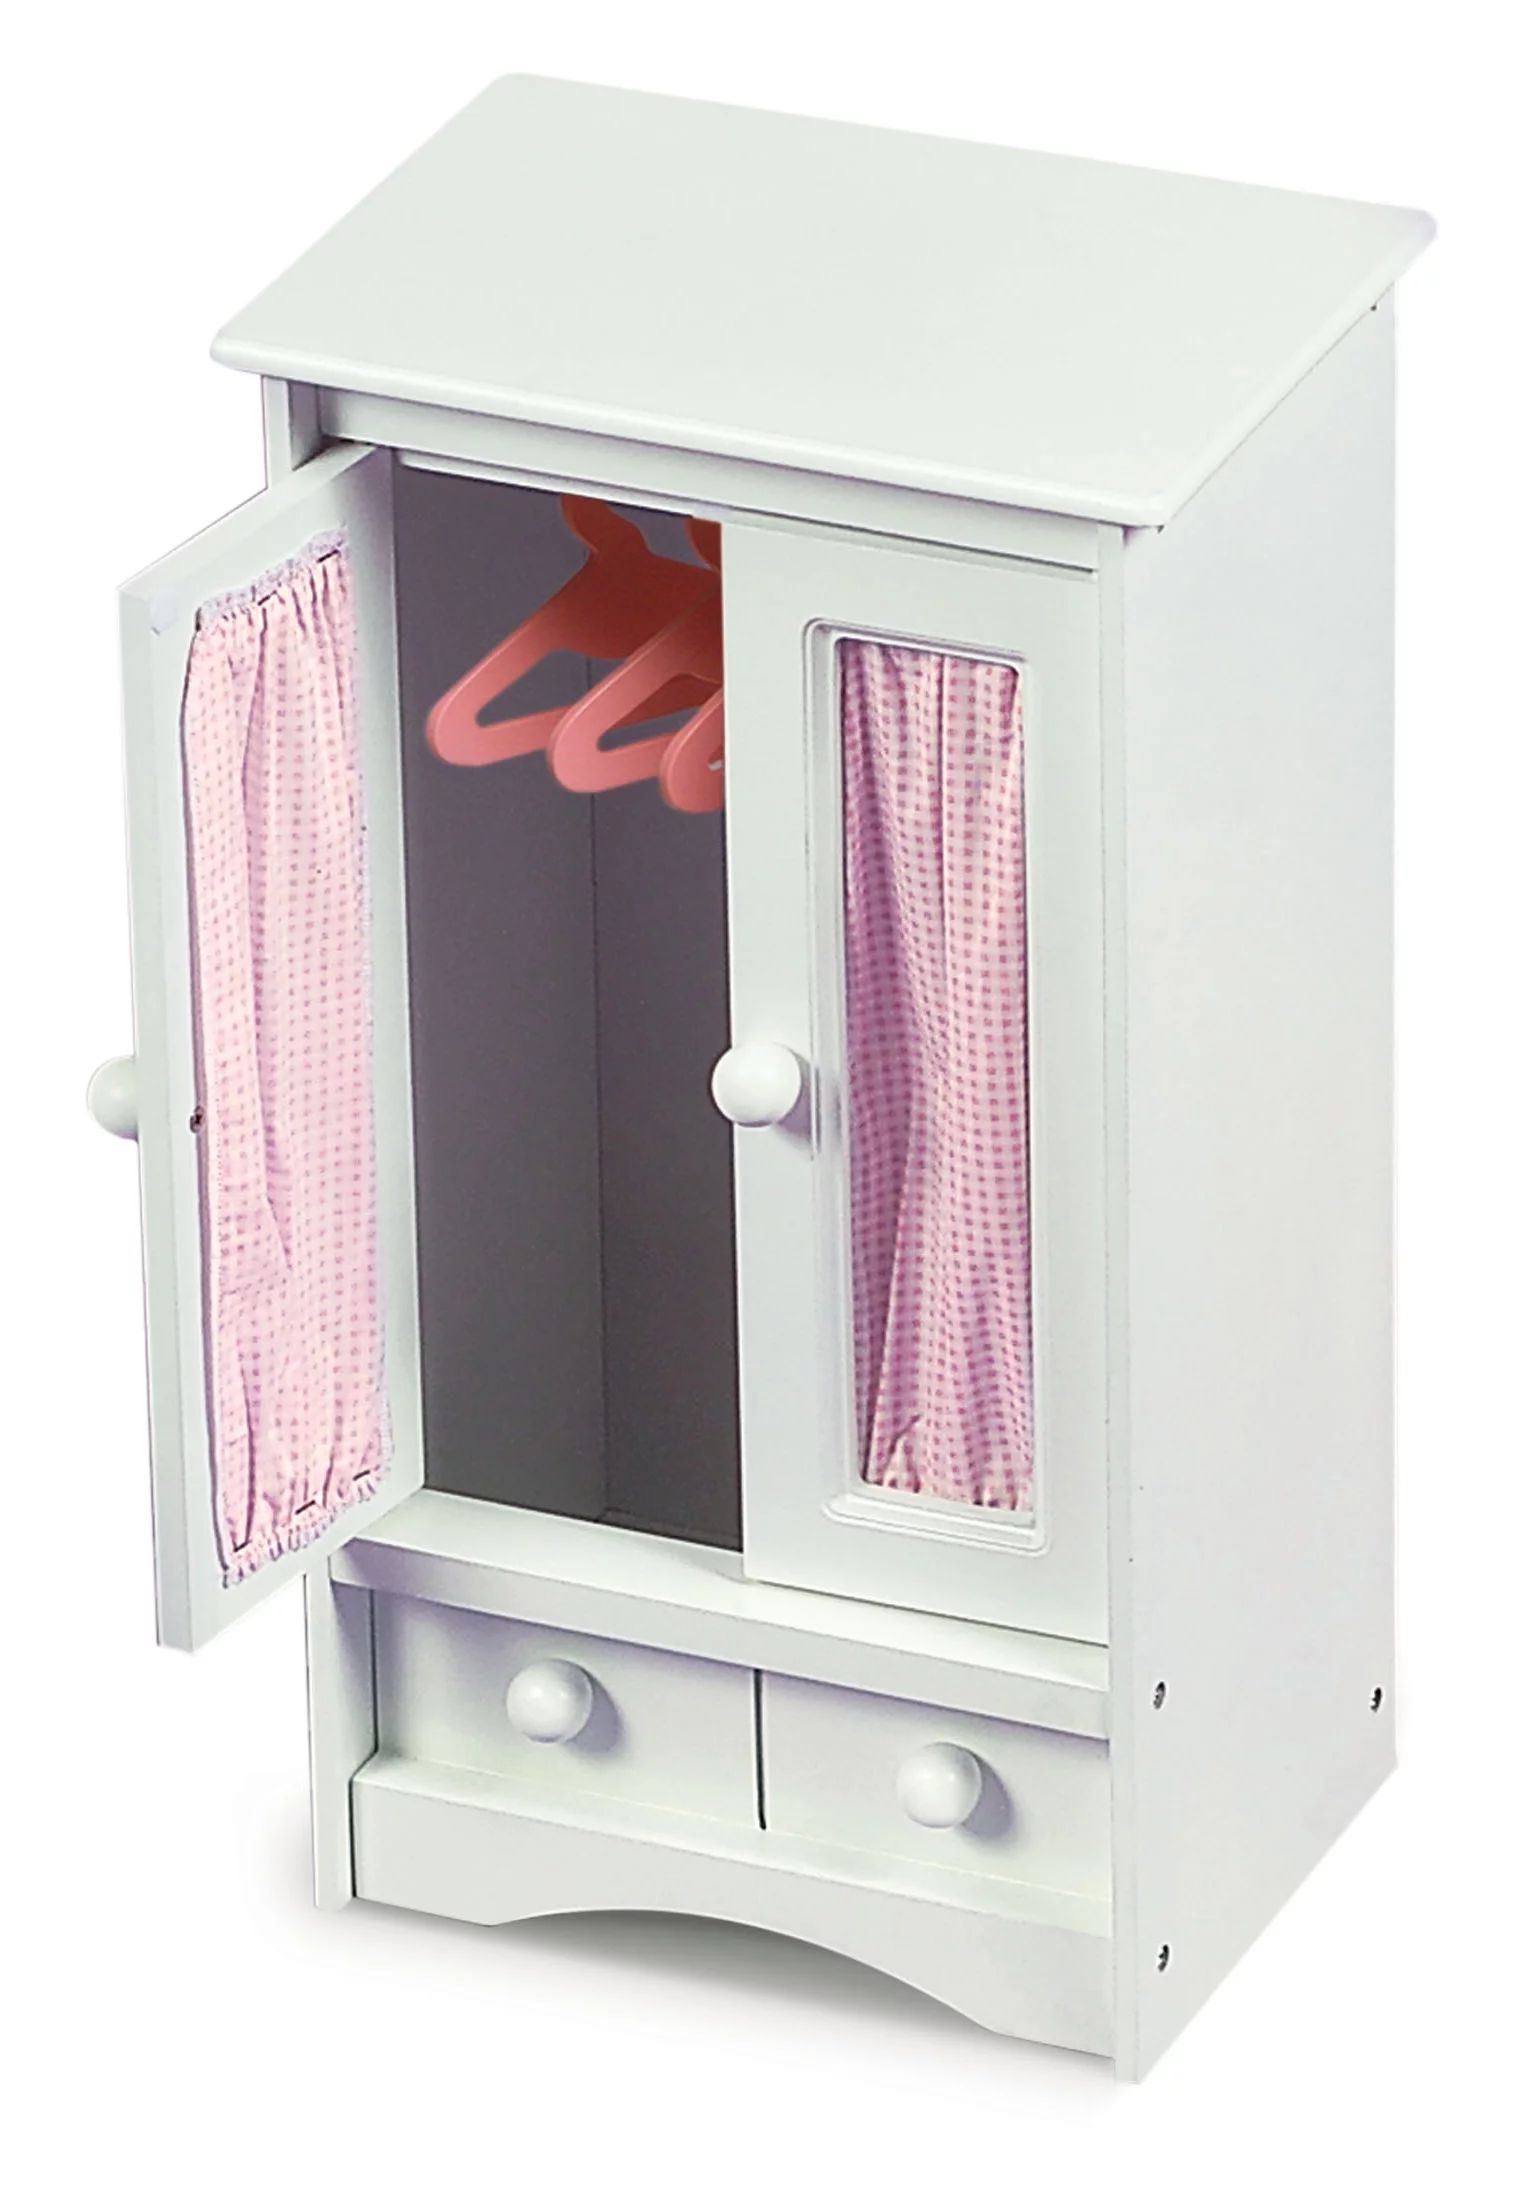 Badger Basket Doll Armoire with Three Hangers - White/Pink | Walmart (US)